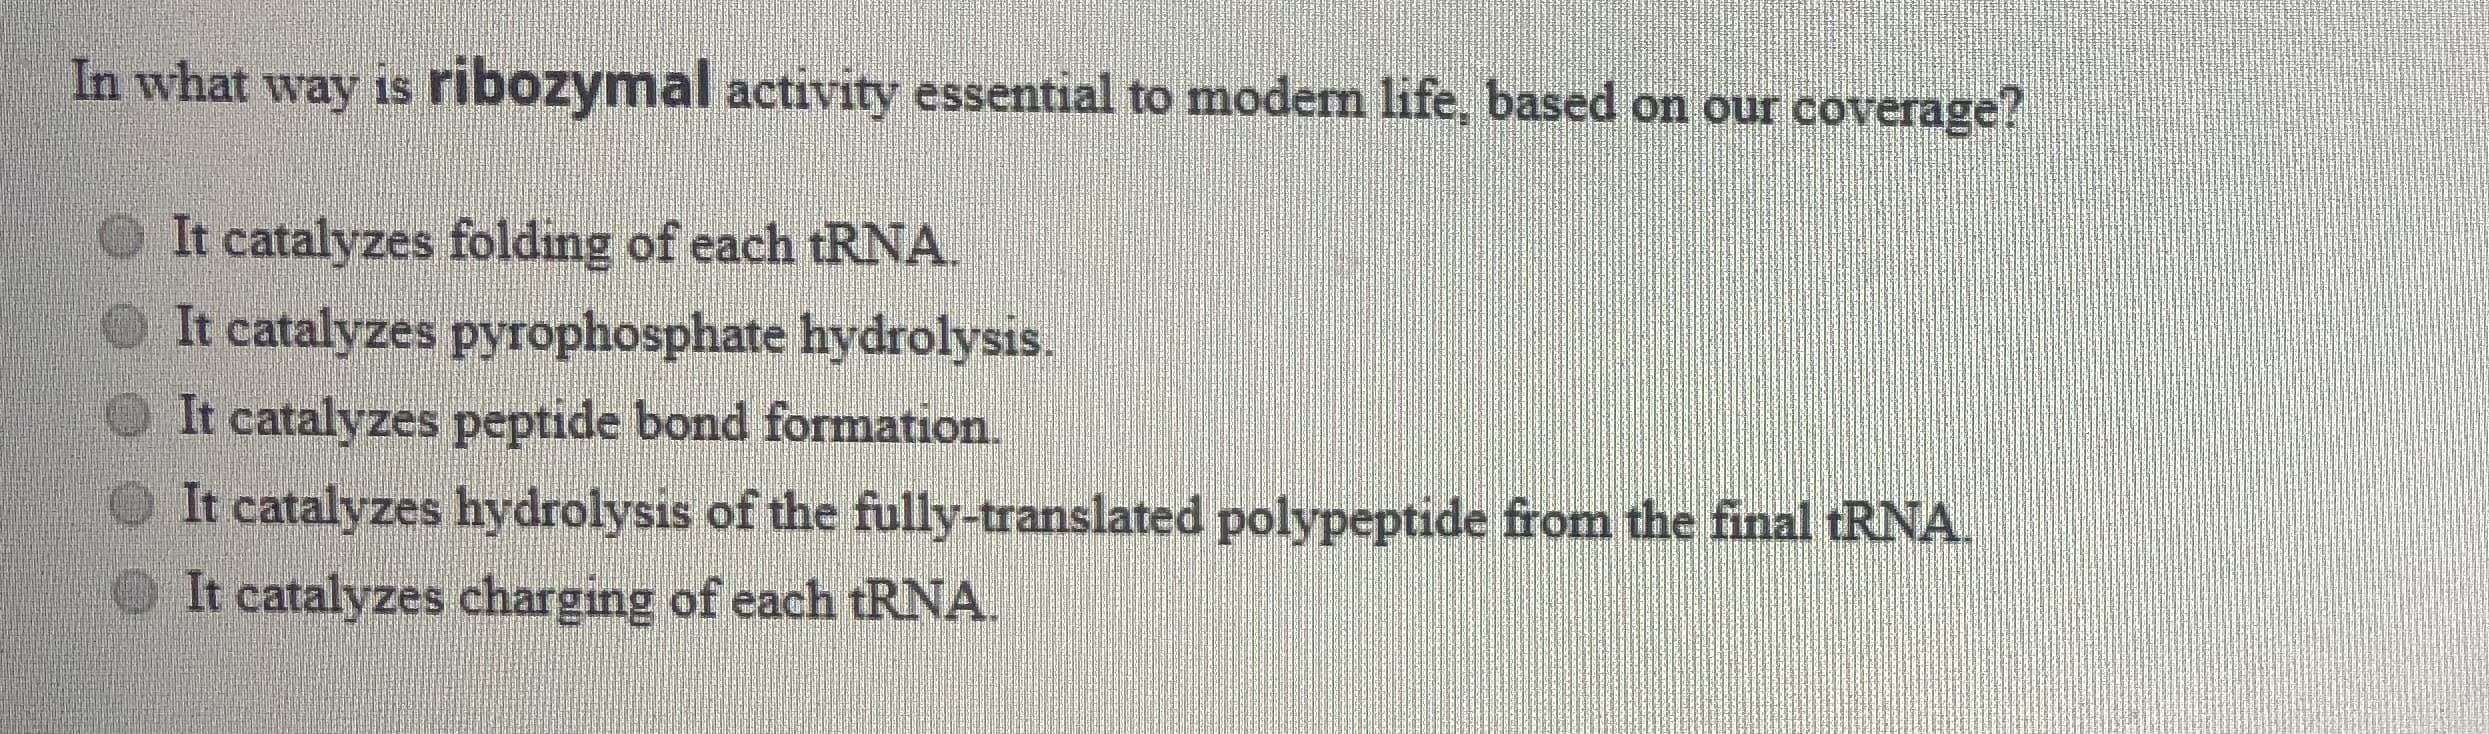 In what way is ribozymal activity essential to modem life, based on our coverage?
It catalyzes folding of each tRNA.
It catalyzes pyrophosphate hydrolysis.
It catalyzes peptide bond formation.
It catalyzes hydrolysis of the fully-translated polypeptide from the final RNA.
It catalyzes charging of each tRNA.
